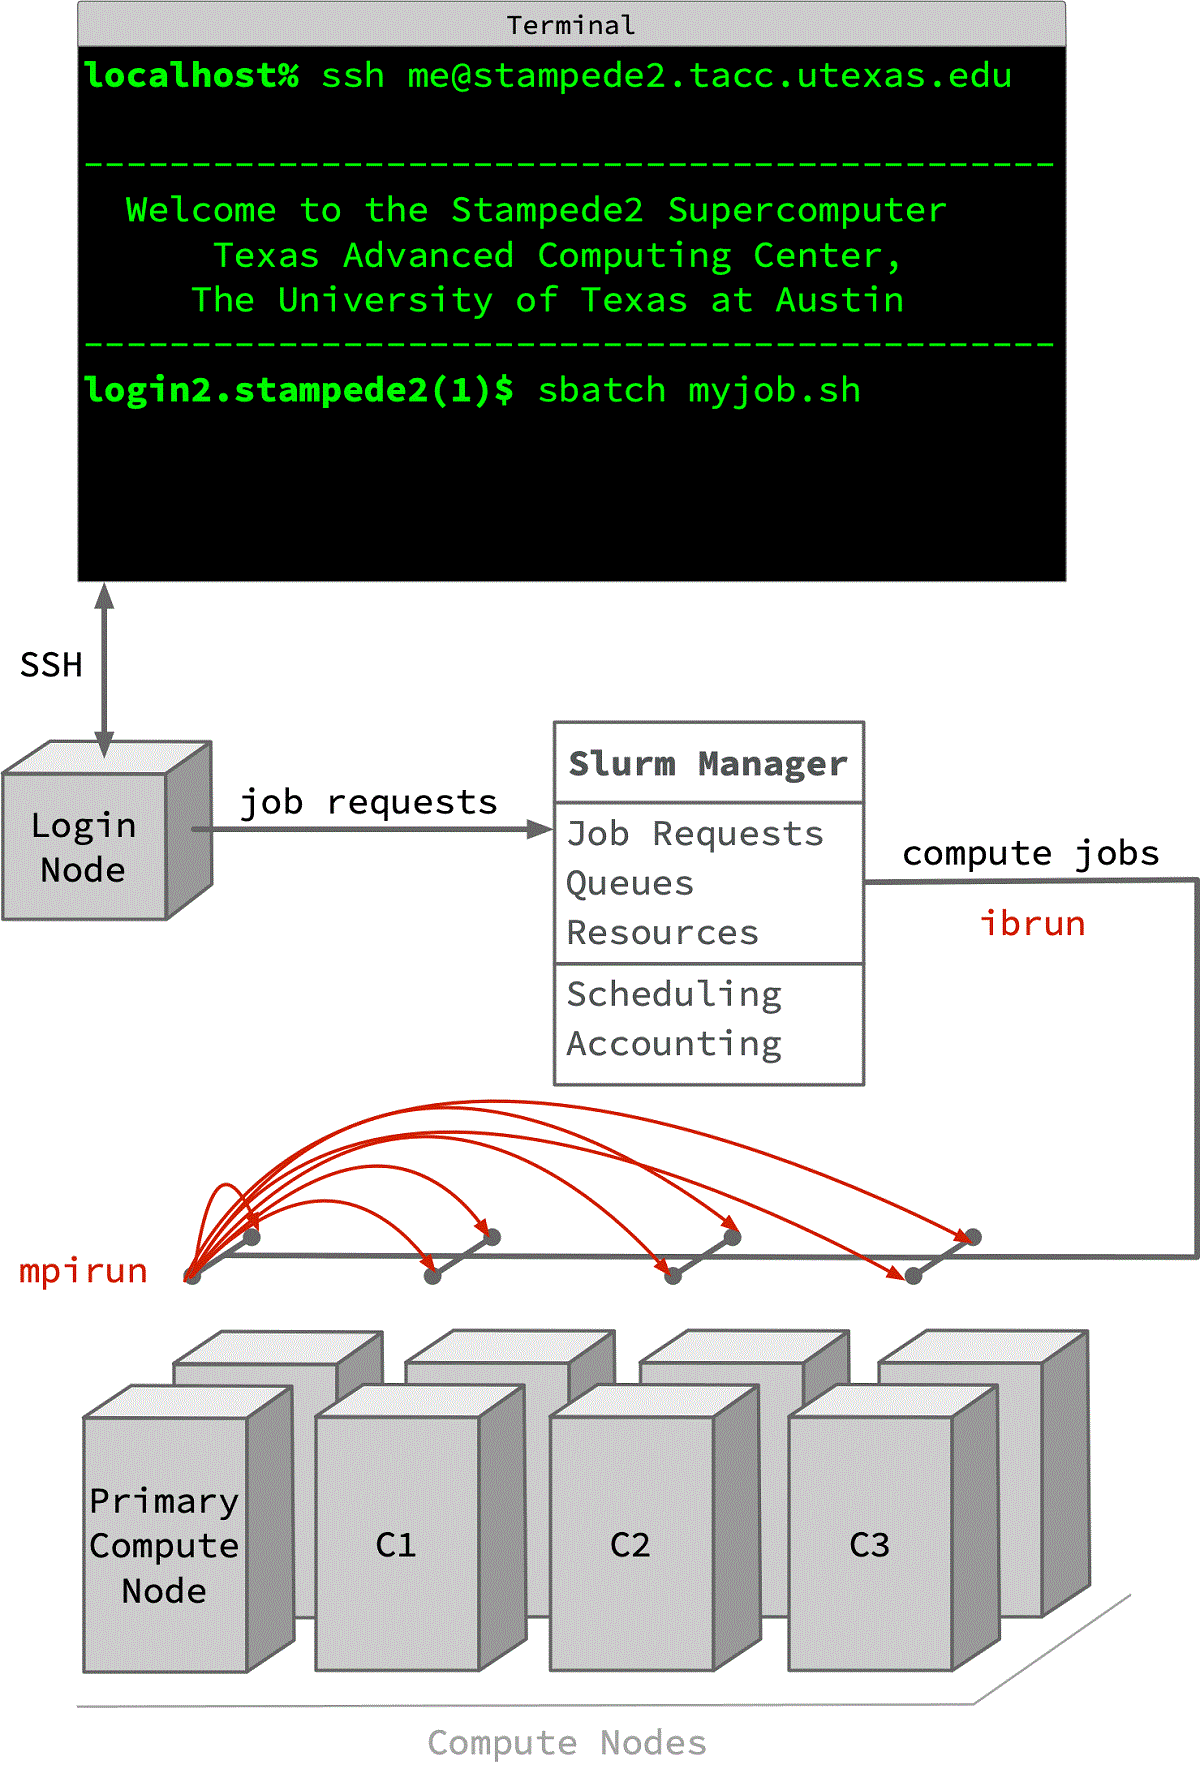 Diagram showing terminal connection to login node via ssh and login node interaction with Slurm manager through sbatch and related commands. The slurm manager takes care of scheduling, managing resource use and distributing work to the compute nodes.